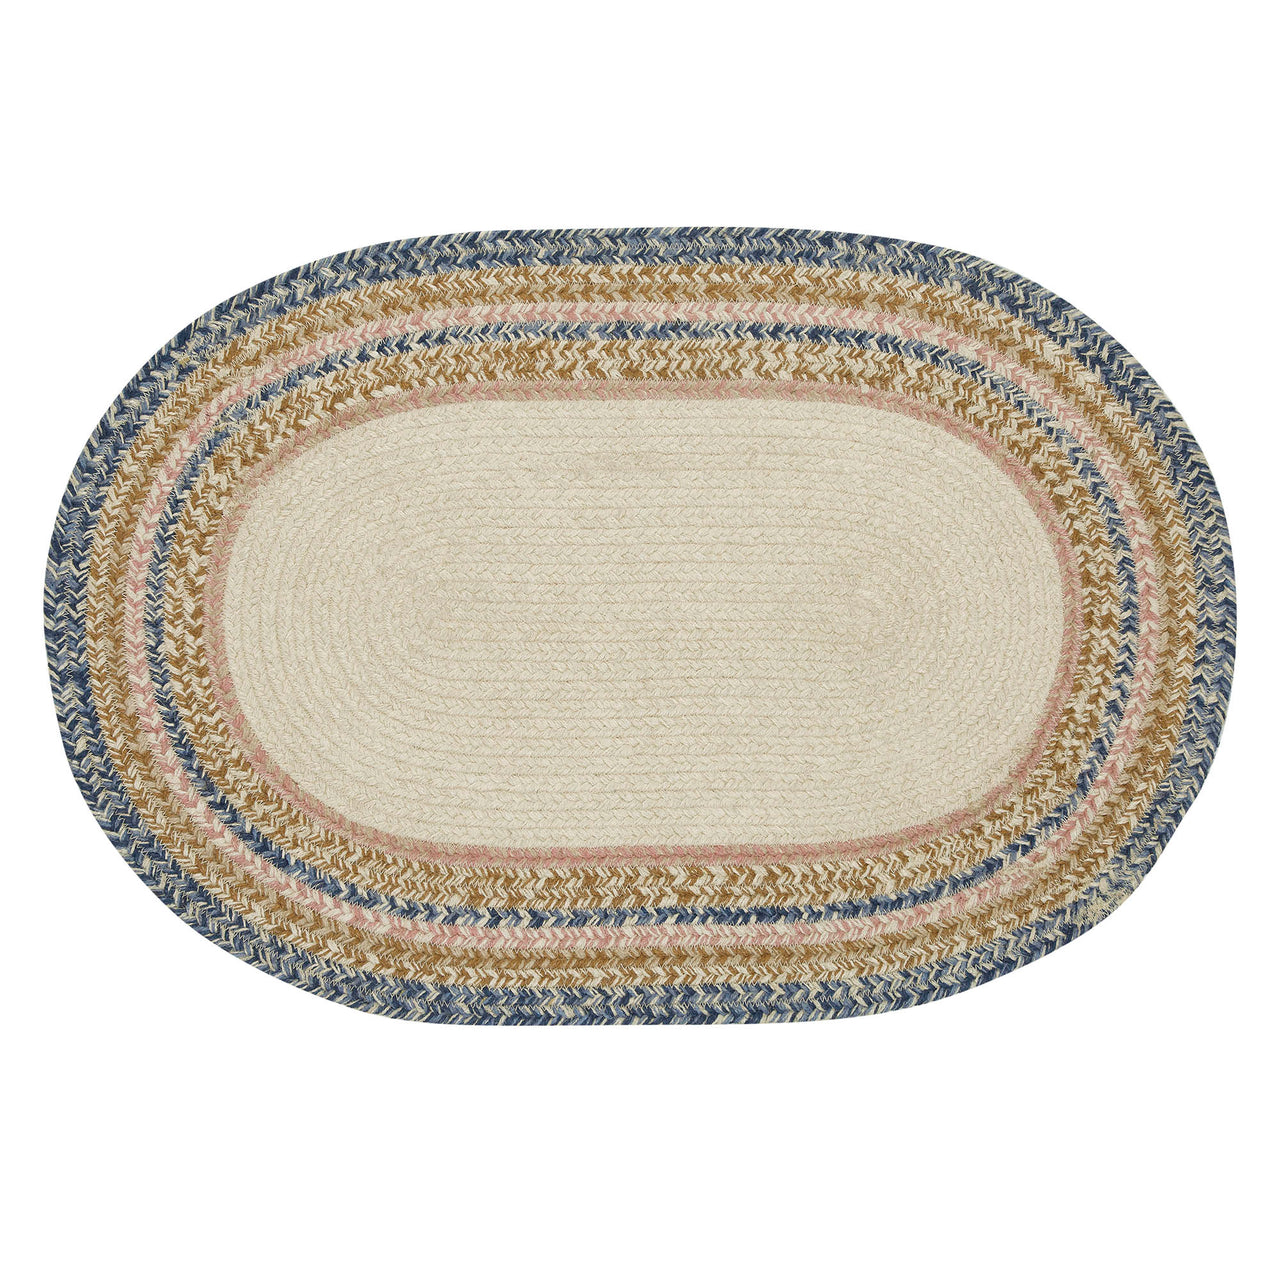 Kaila Happy Spring Jute Braided Rug Oval with Rug Pad 20"x30" VHC Brands